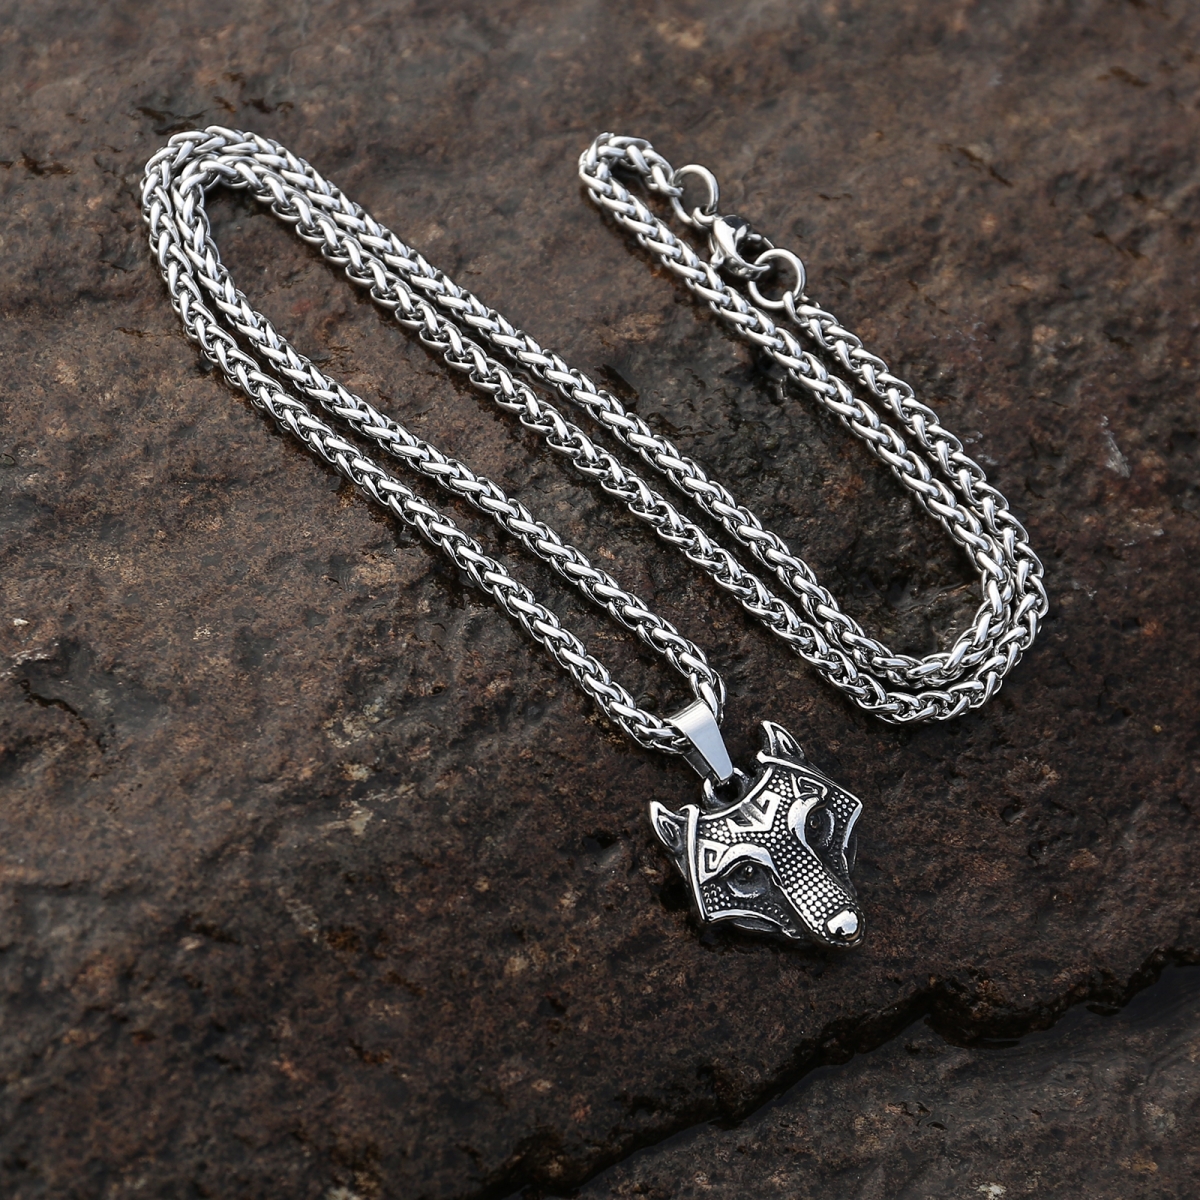 Wolf Viking Necklace US$2.9/PC-NORSECOLLECTION- Viking Jewelry,Viking Necklace,Viking Bracelet,Viking Rings,Viking Mugs,Viking Accessories,Viking Crafts